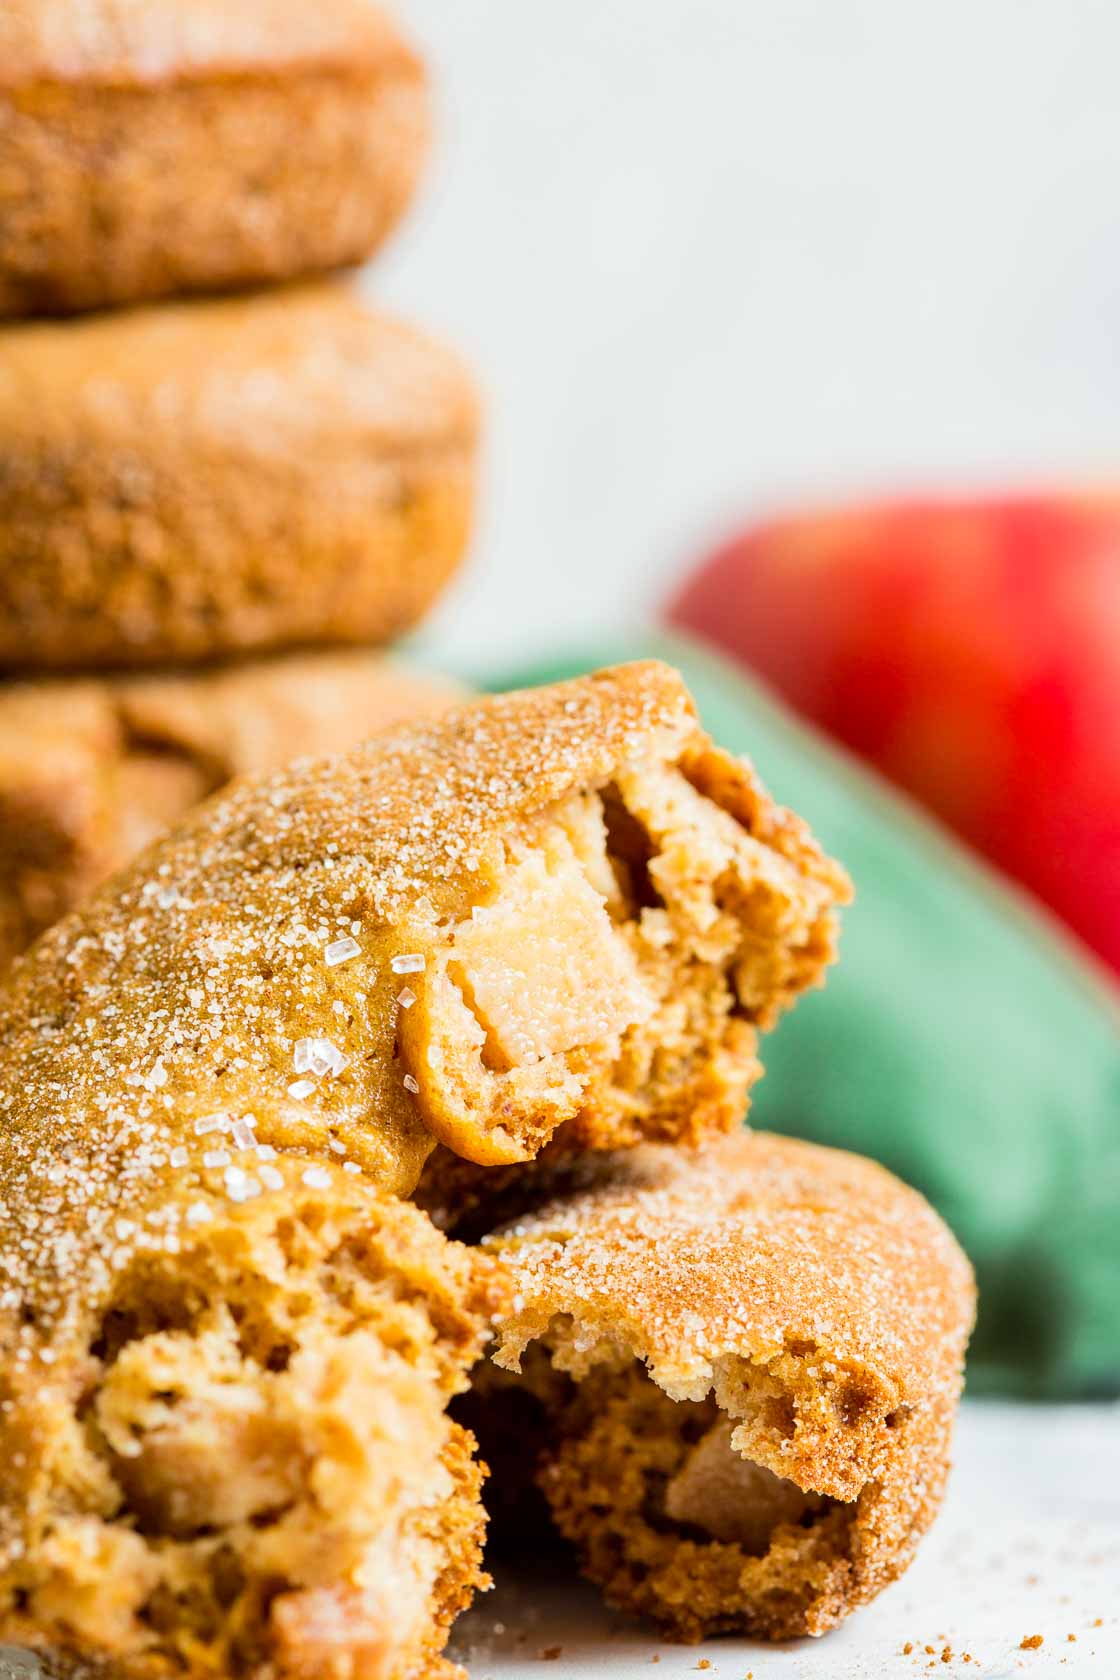 A close up of apple cinnamon donuts broken in half to show apple chunks. A stack of donuts with cinnamon-sugar, a red apple, green apple, cinnamon sticks and green cloth in the background.